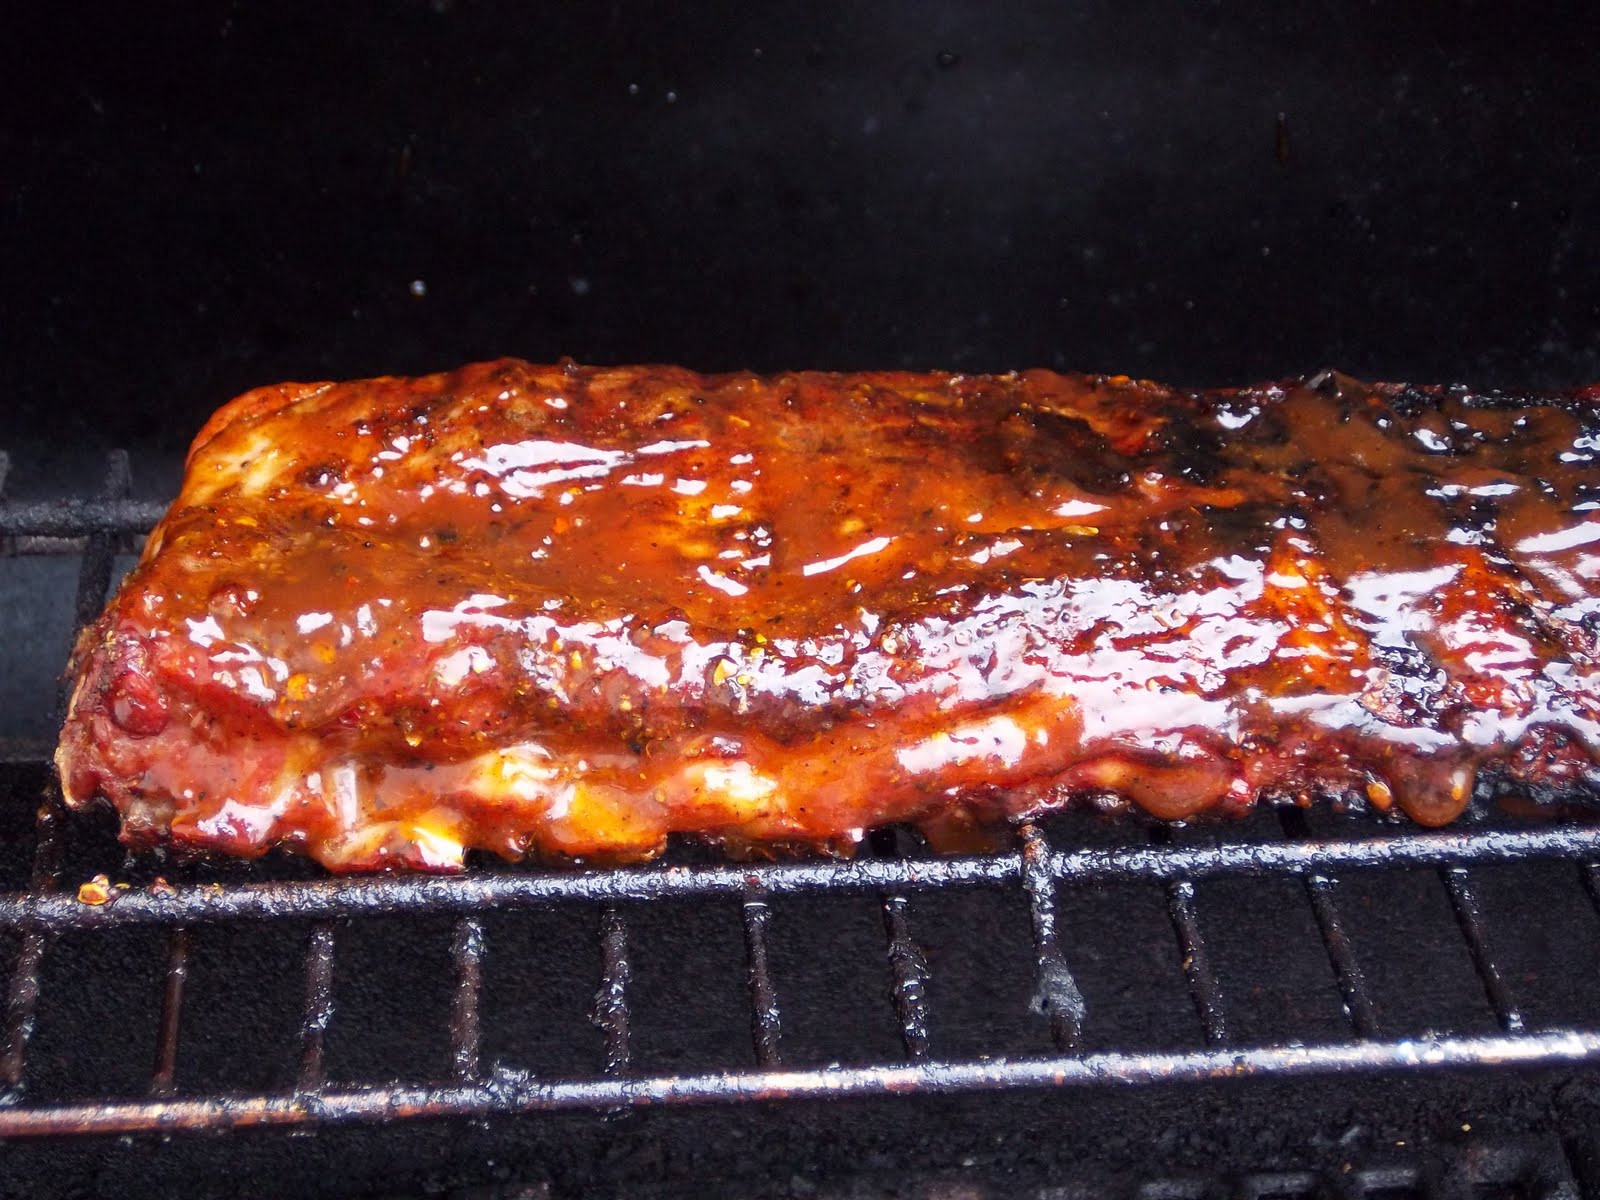 Cooking Pork Ribs On Gas Grill
 The best is yet to e BBQ Pork Ribs on a Gas Grill